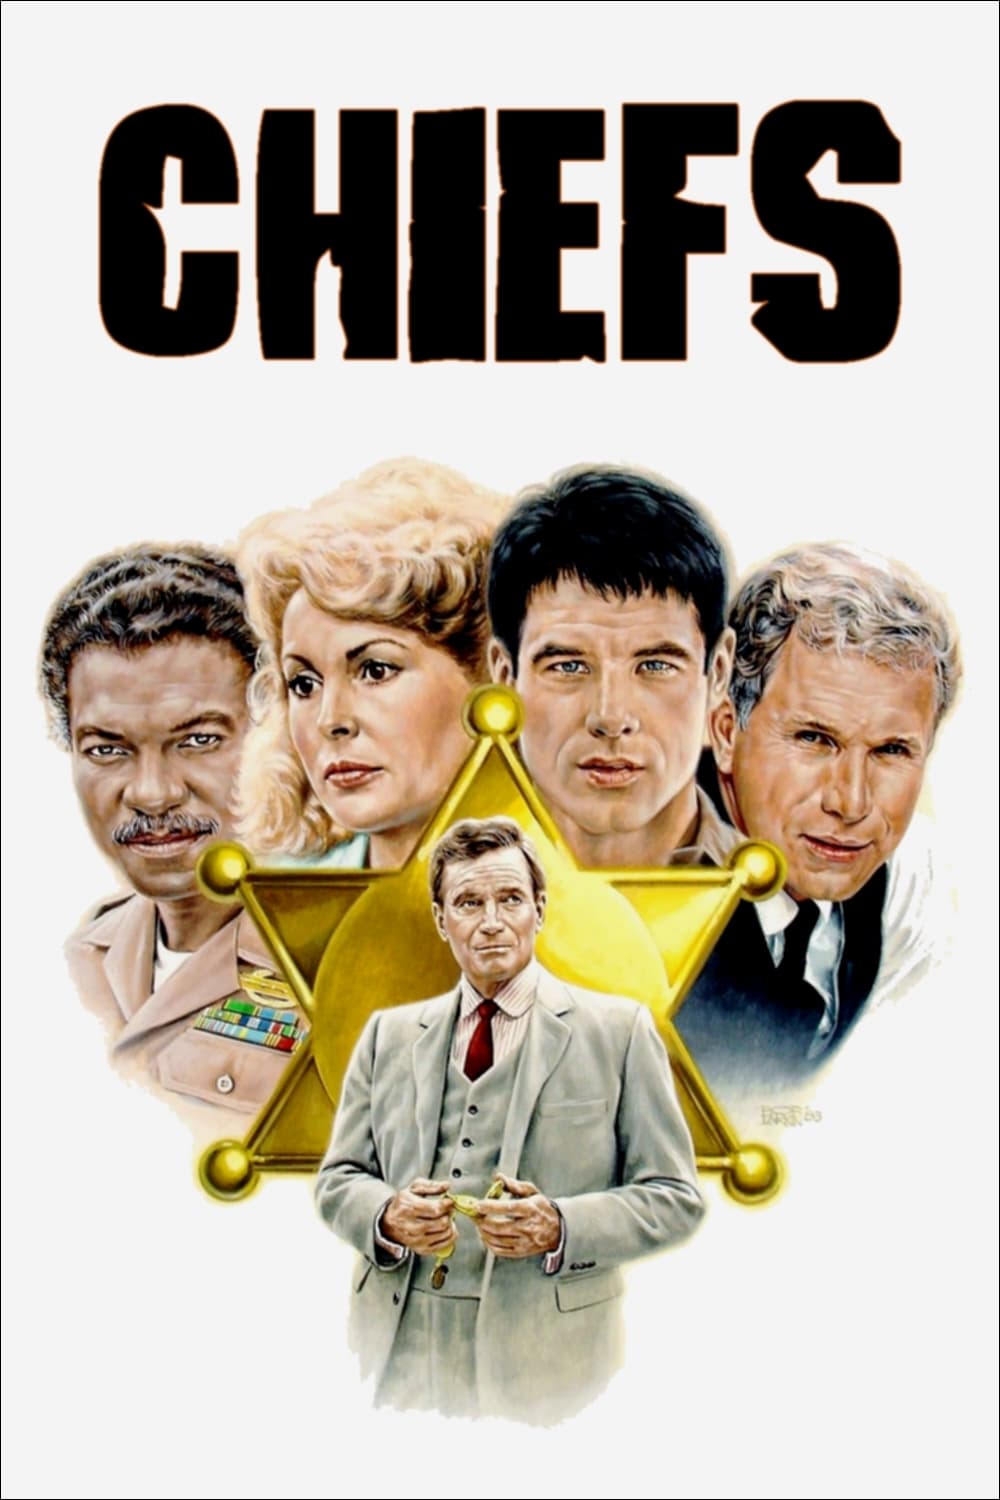 Chiefs (1983) TV show. Where To Watch Streaming Online